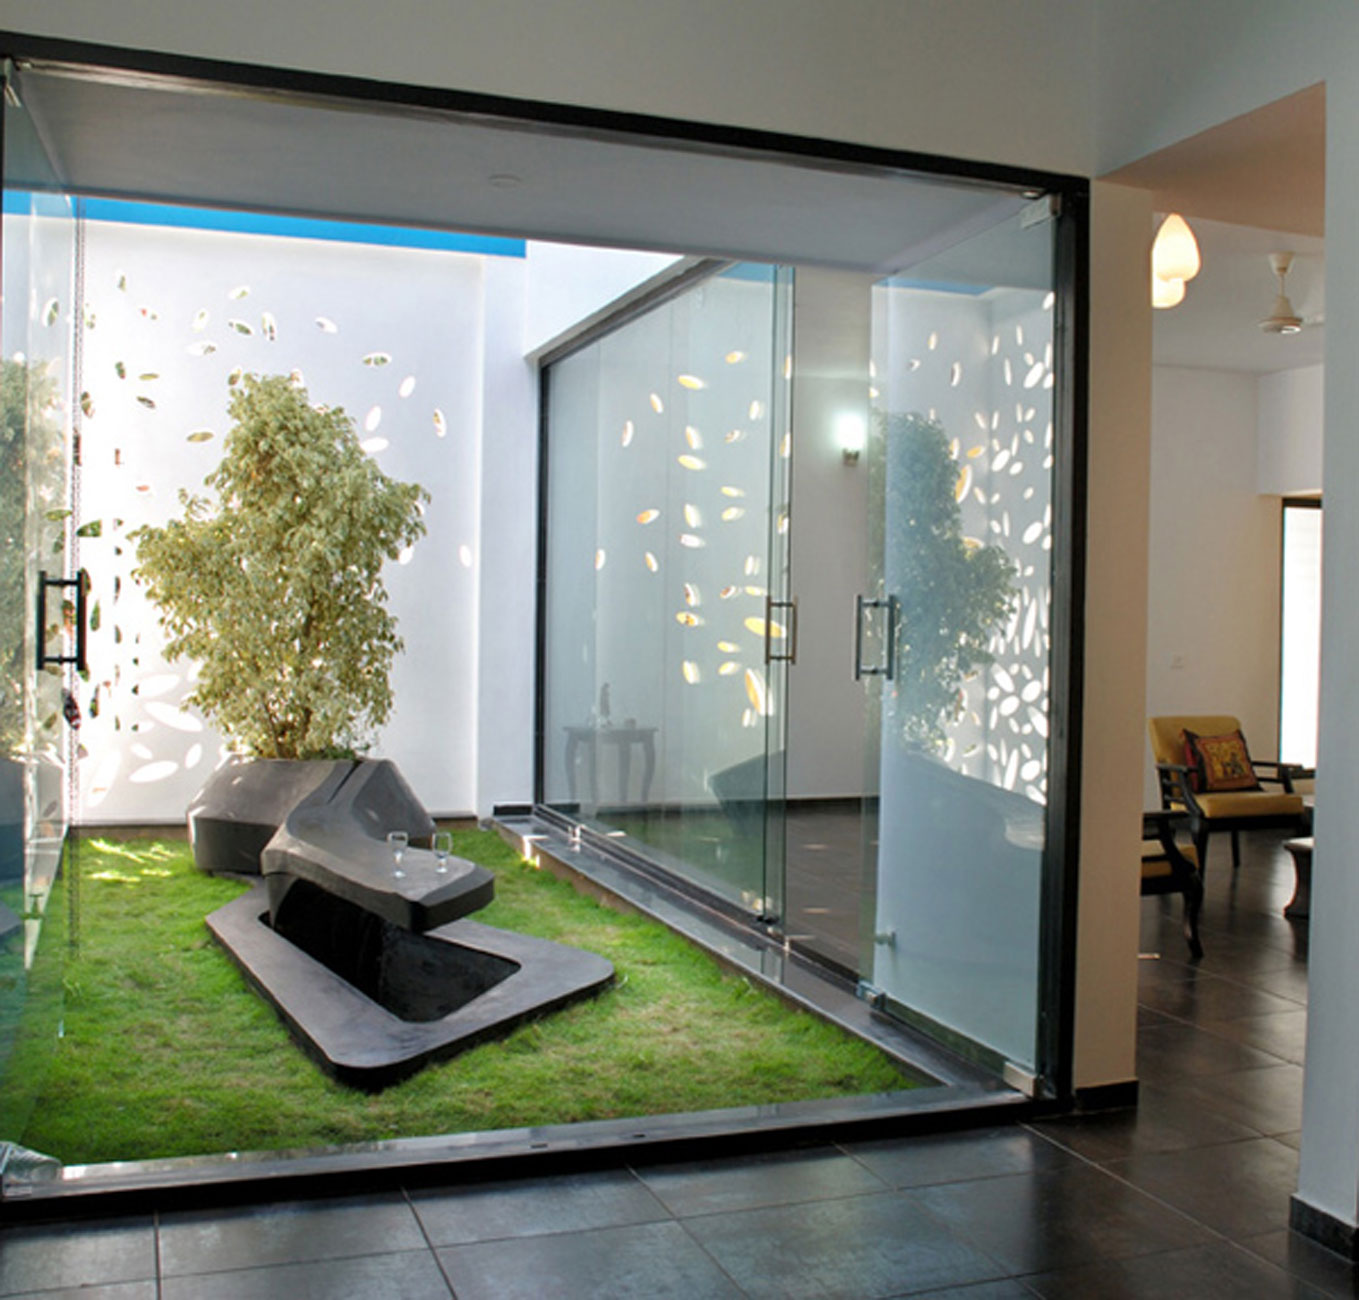 http://www.viahouse.com/wp-content/uploads/2011/02/Modern-House-Design-with-Beautiful-Wall-Details-in-India-Indoor-Garden.jpg